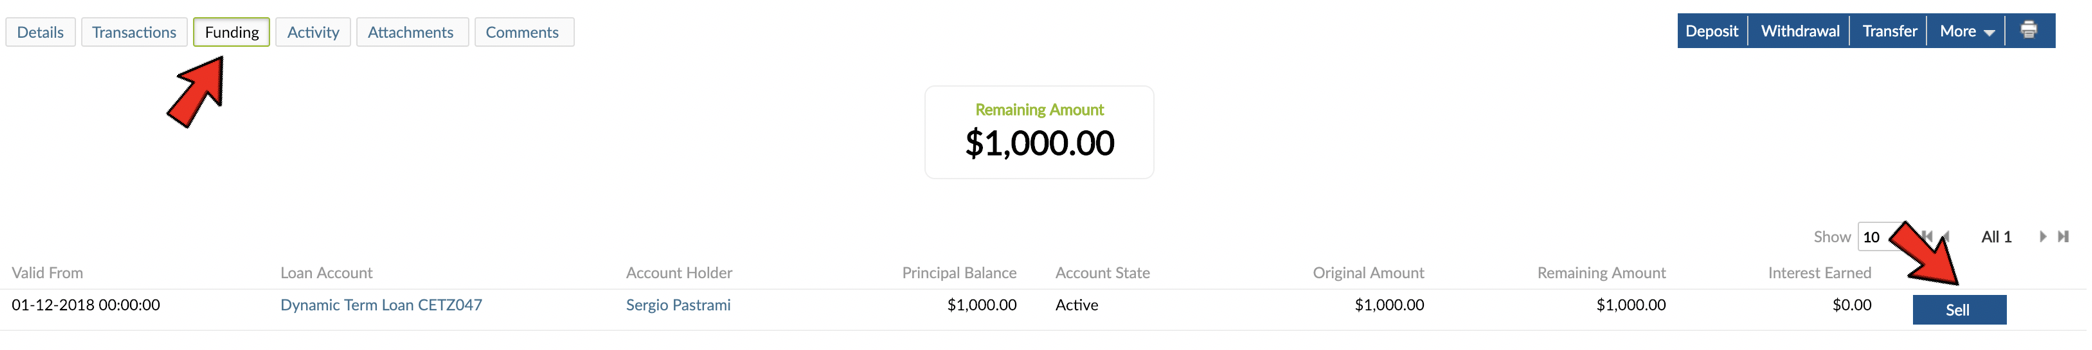 Selling a Loan Fraction Share from Sell button.